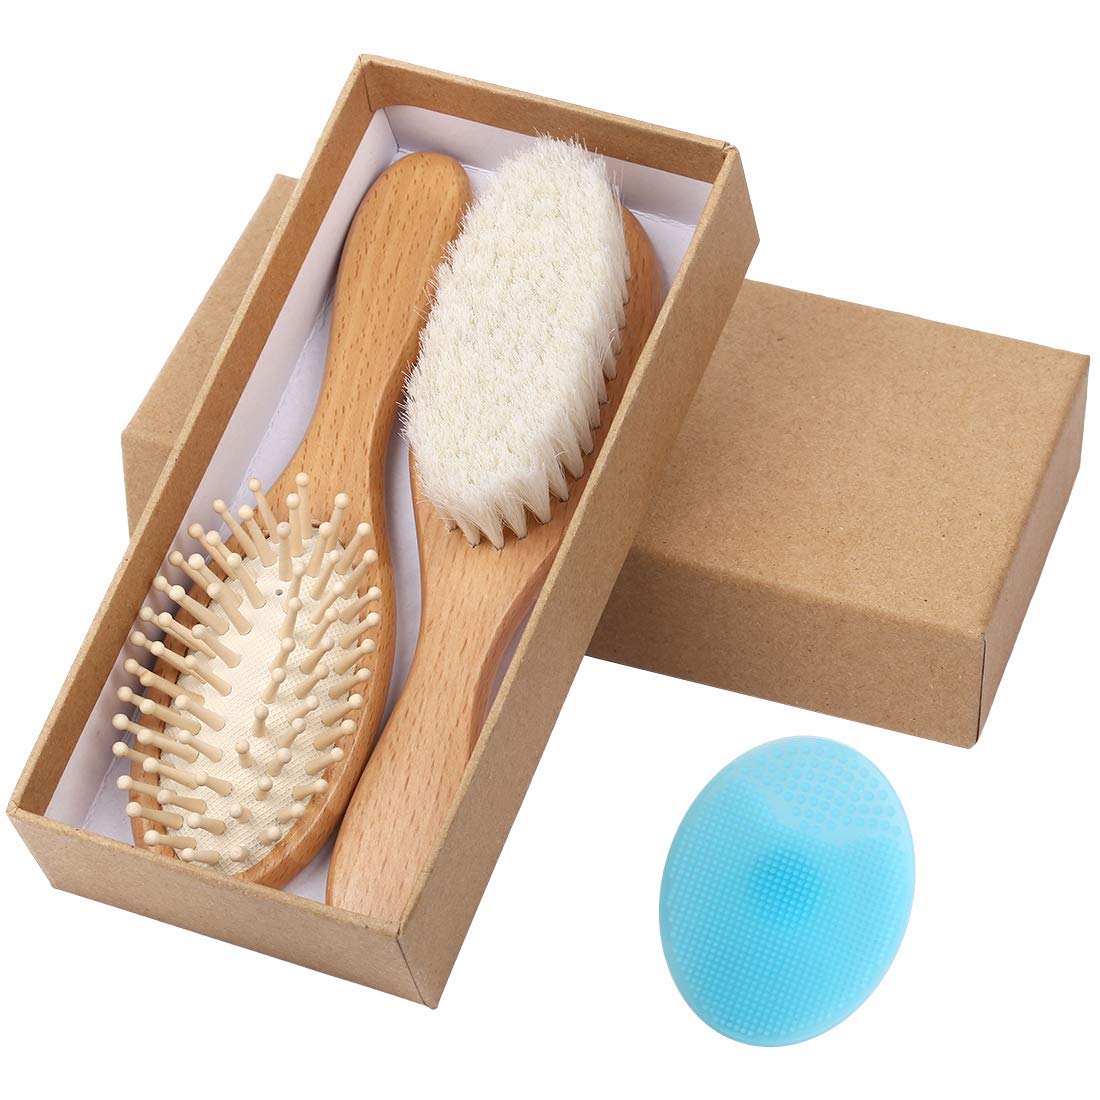 Wood pin and goat bristles wooden baby hair brush set Featured Image